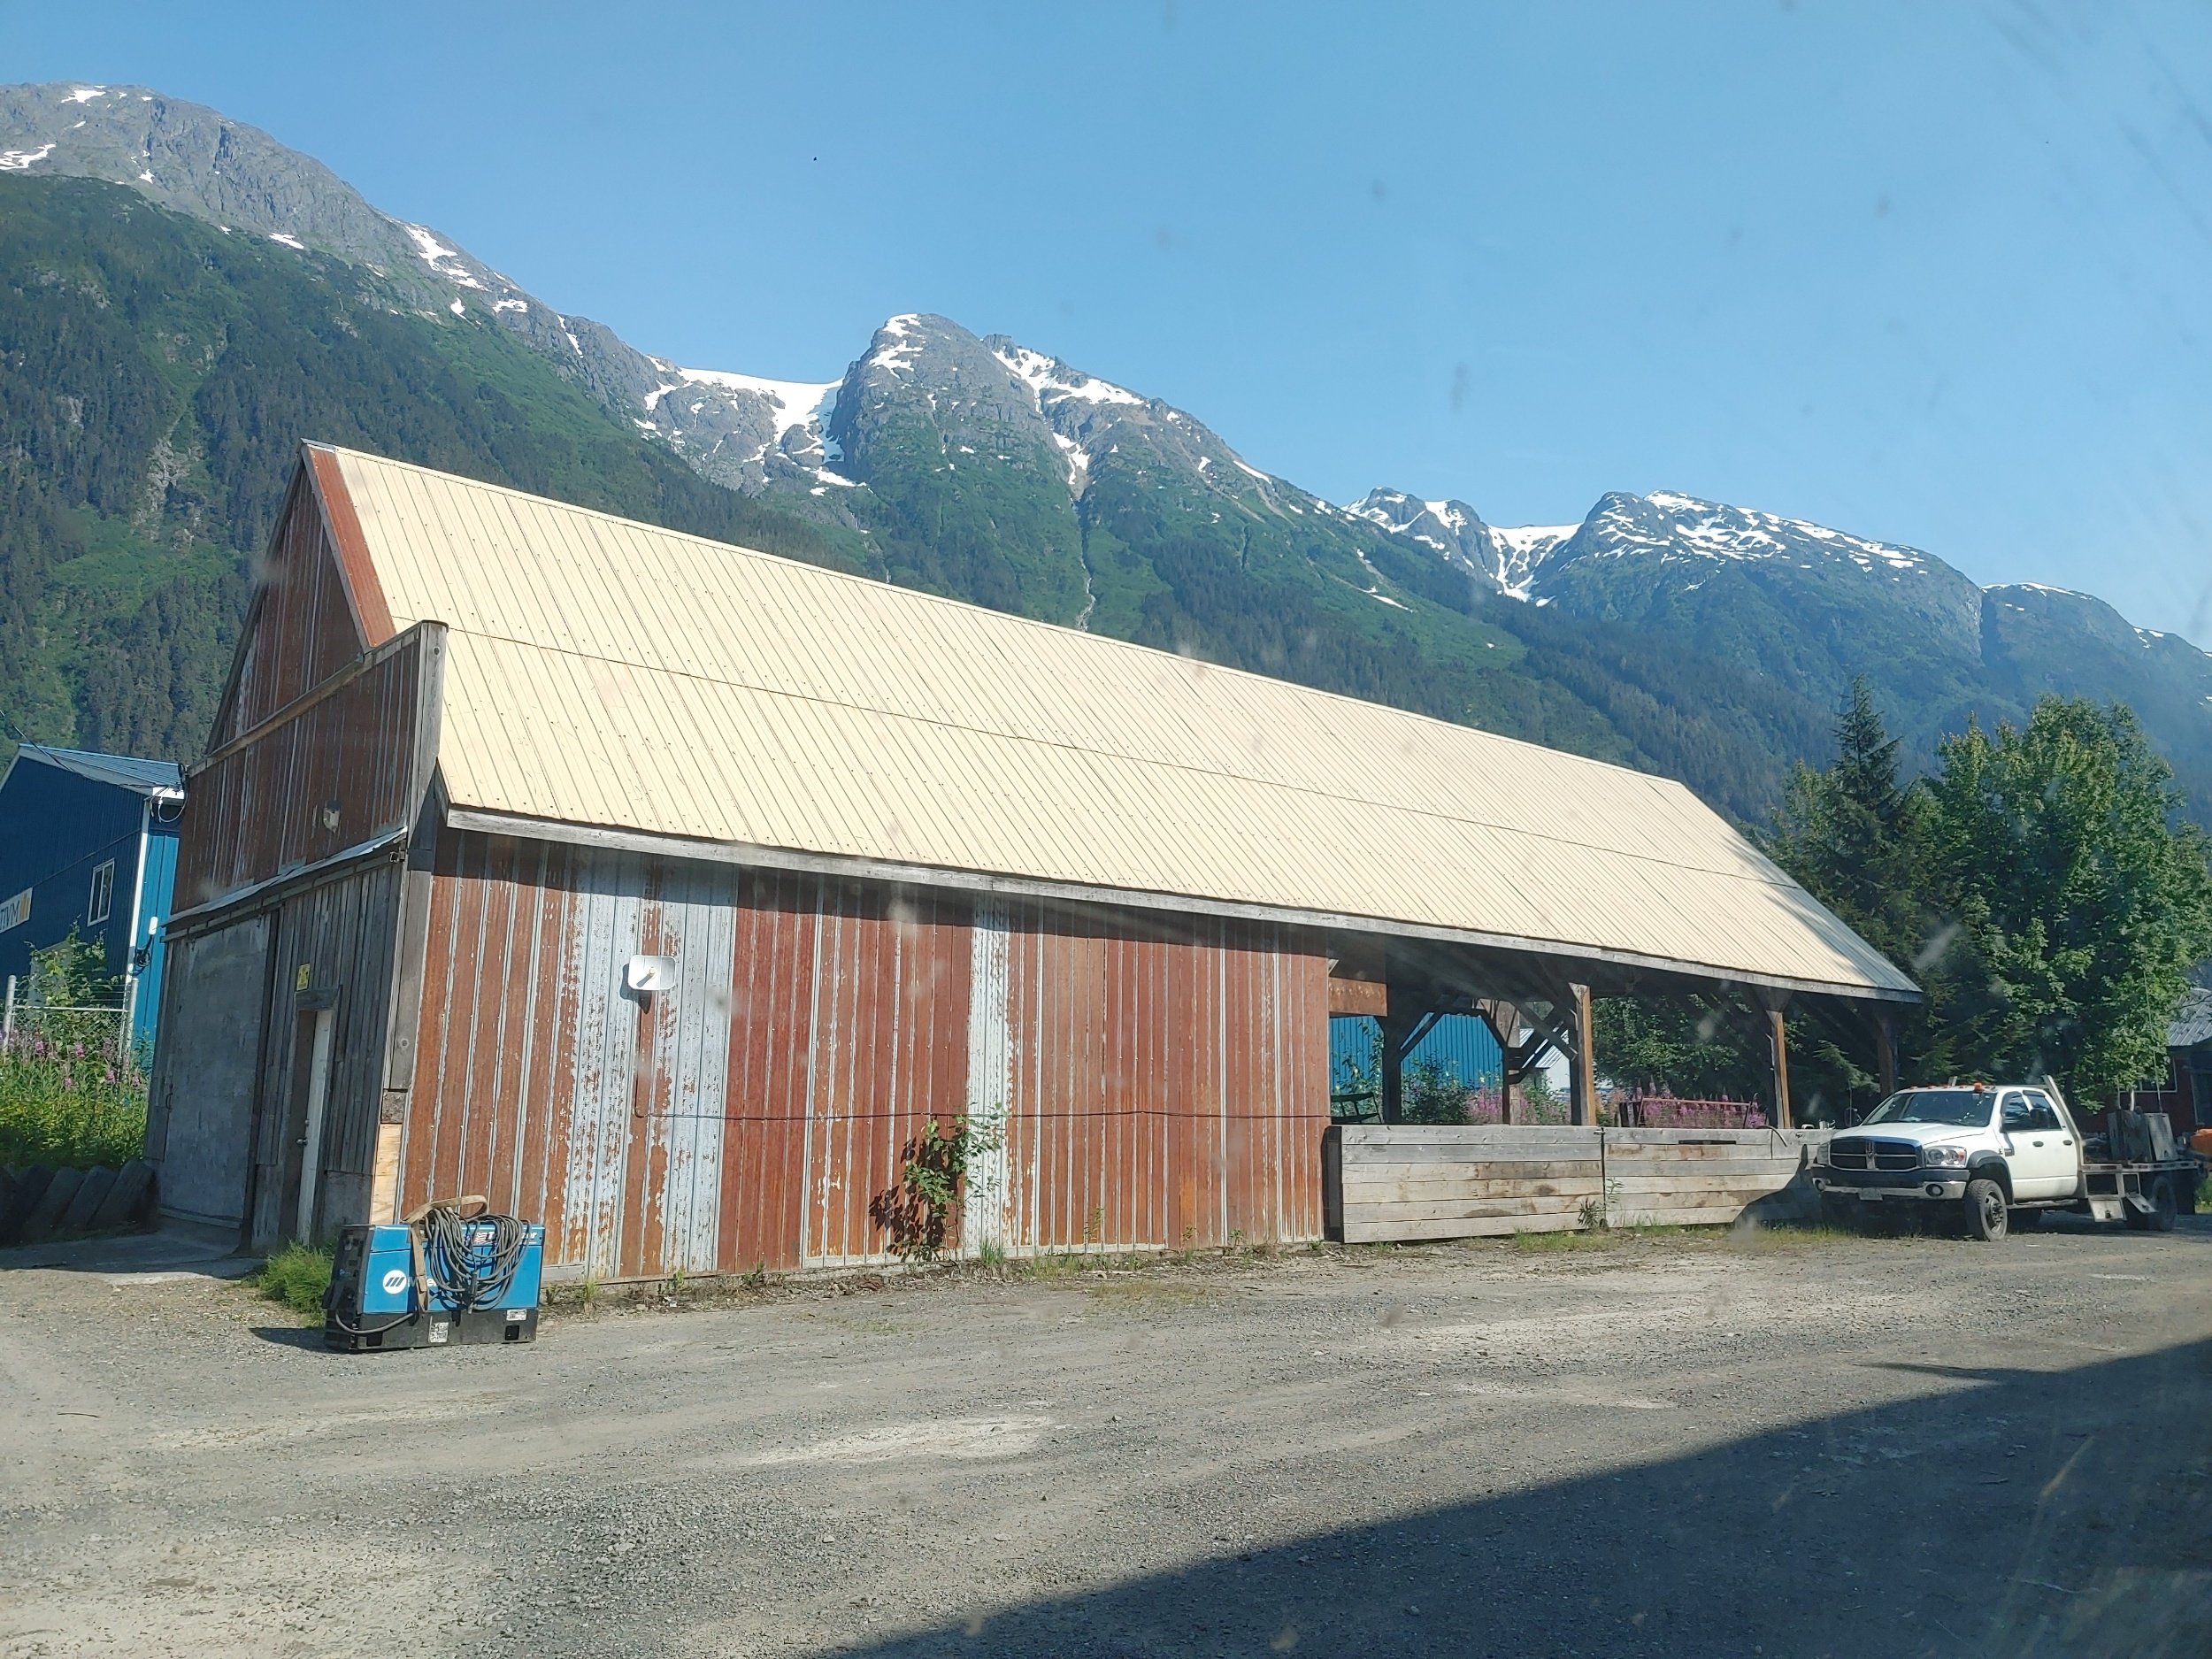  Back at Dwayne’s workshop, waiting for his to cruise by after some work errands.  He suggested I go to camp at Lake Clements, where it would be a little cooler and I could take a dip. Apparently the day use sites in Canada are friendly to overnighti